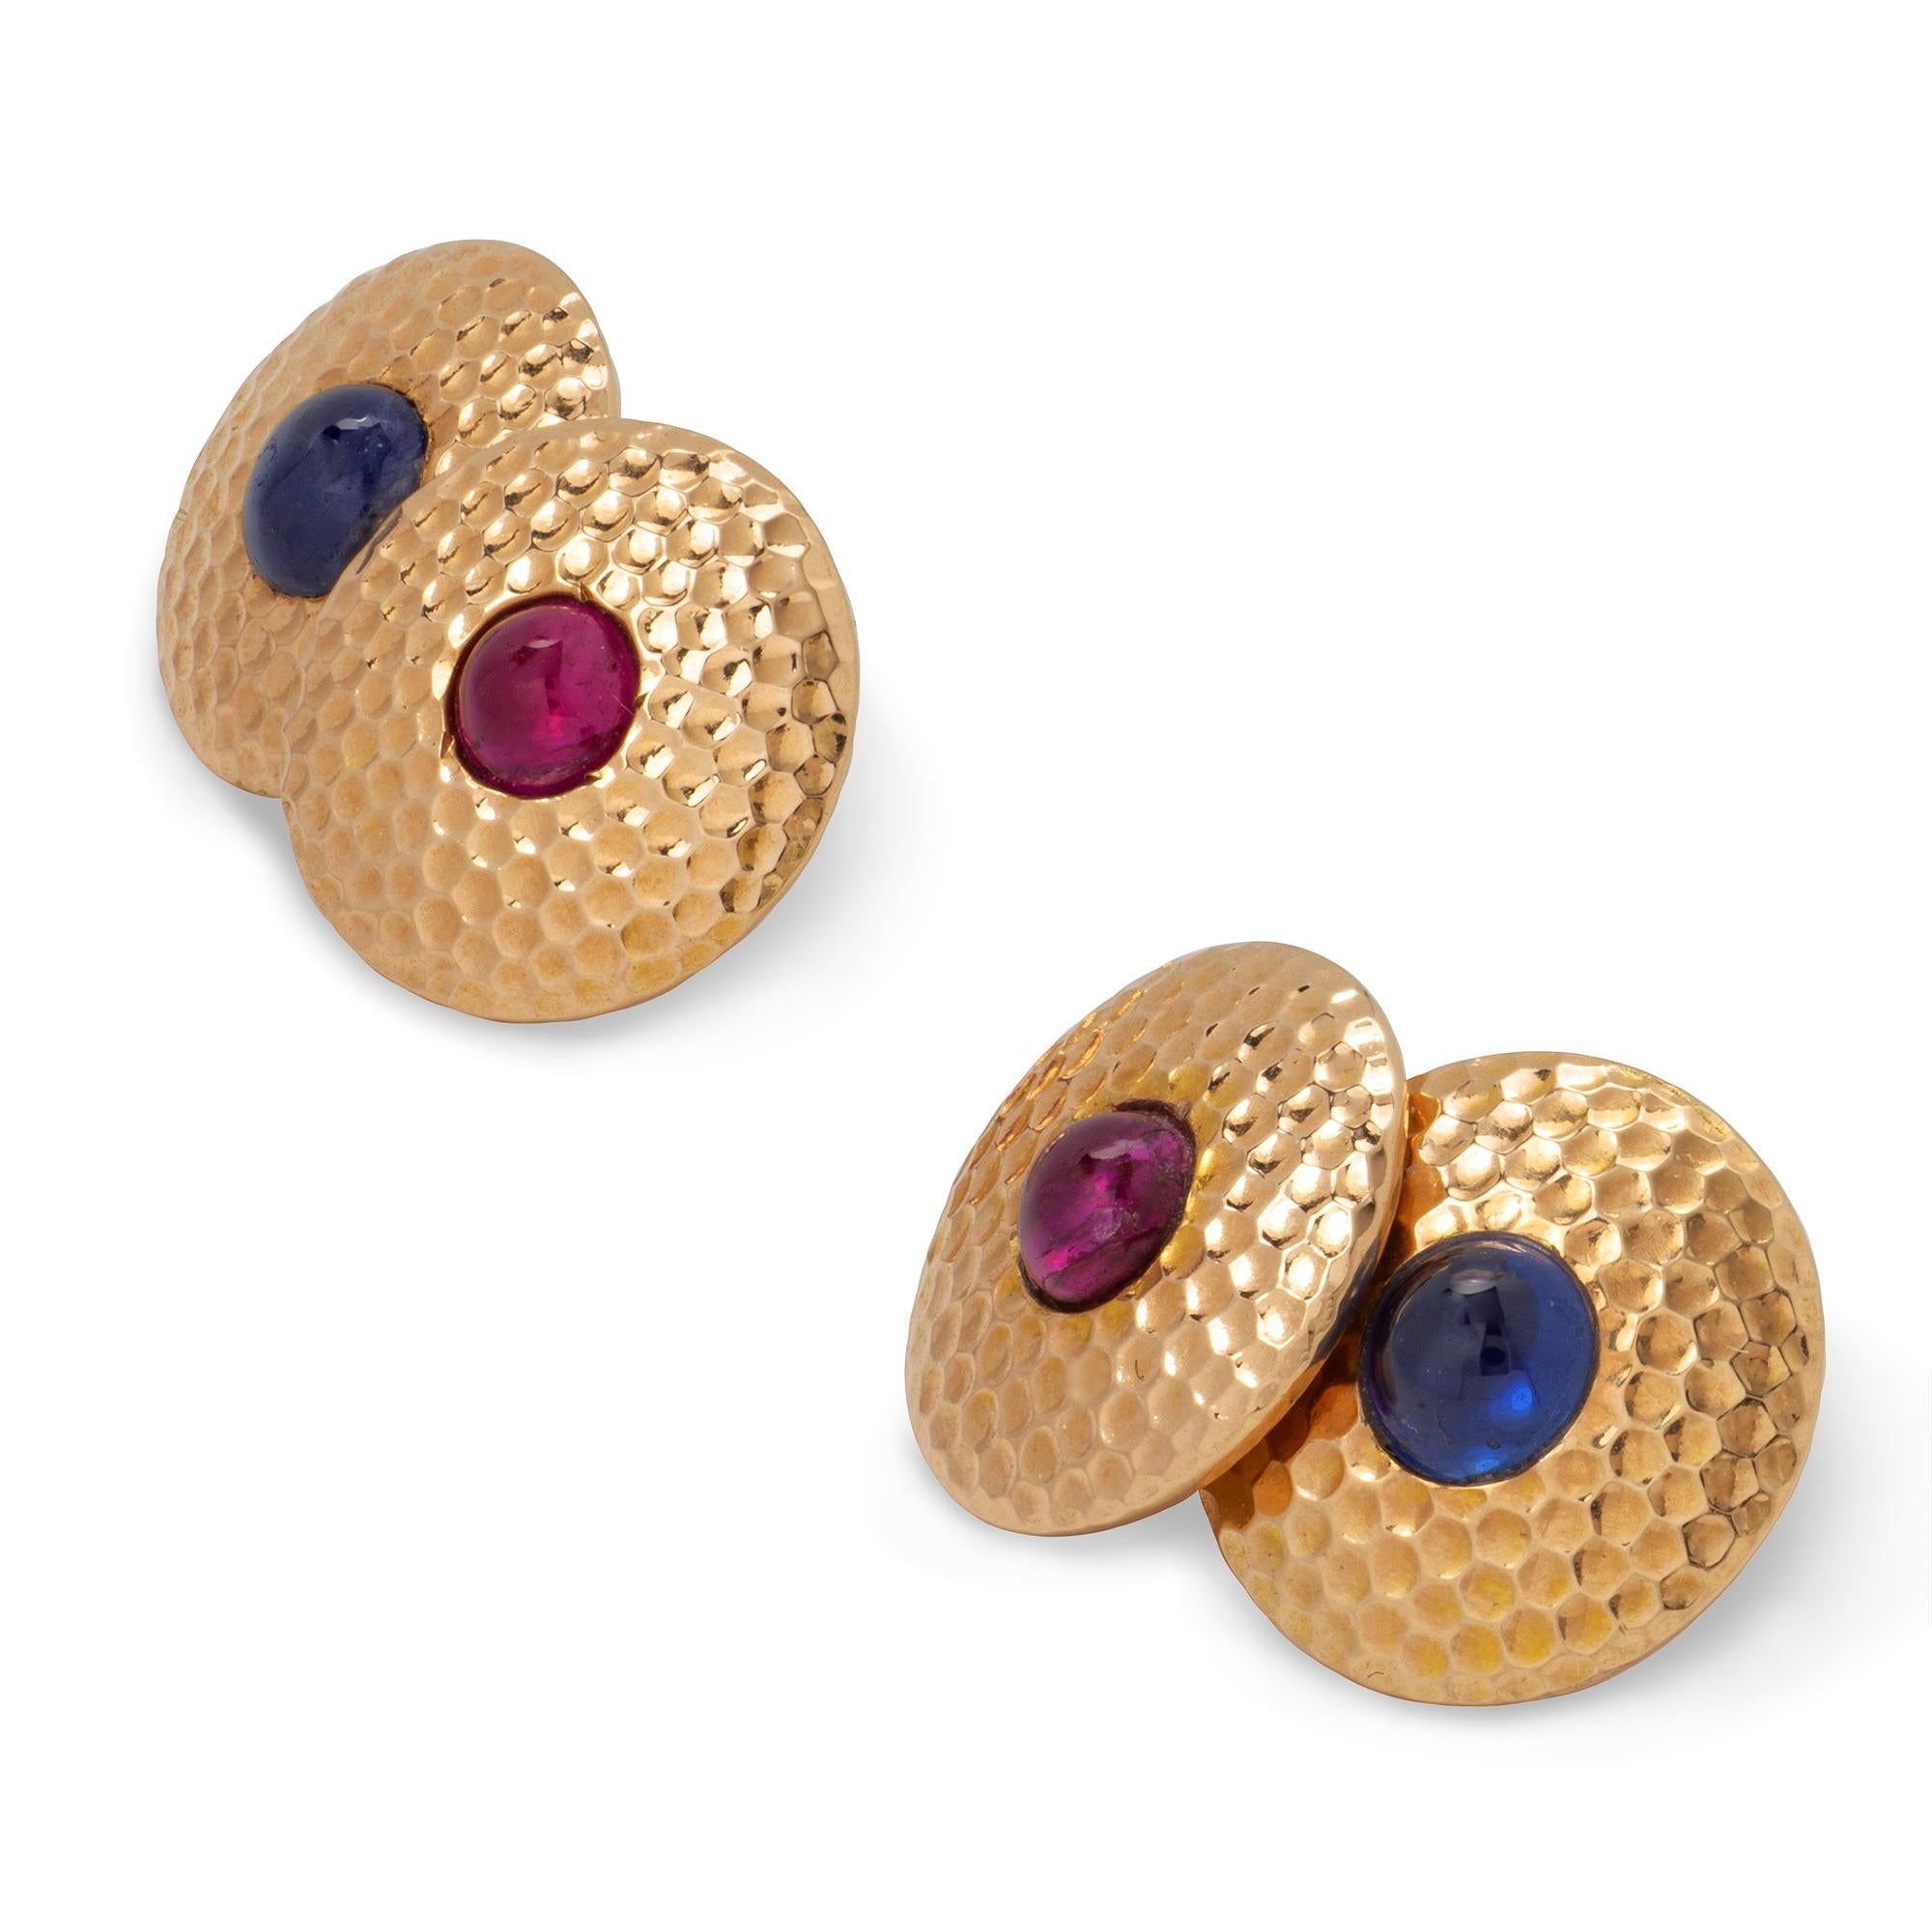 A pair of Art Deco gem-set yellow gold cufflinks, each cufflink consisted of two round plaques of hammered gold, the one set with a cabochon ruby and the other with a cabochon sapphire with oval chain link, circa 1920,  measuring approximately 1.3cm